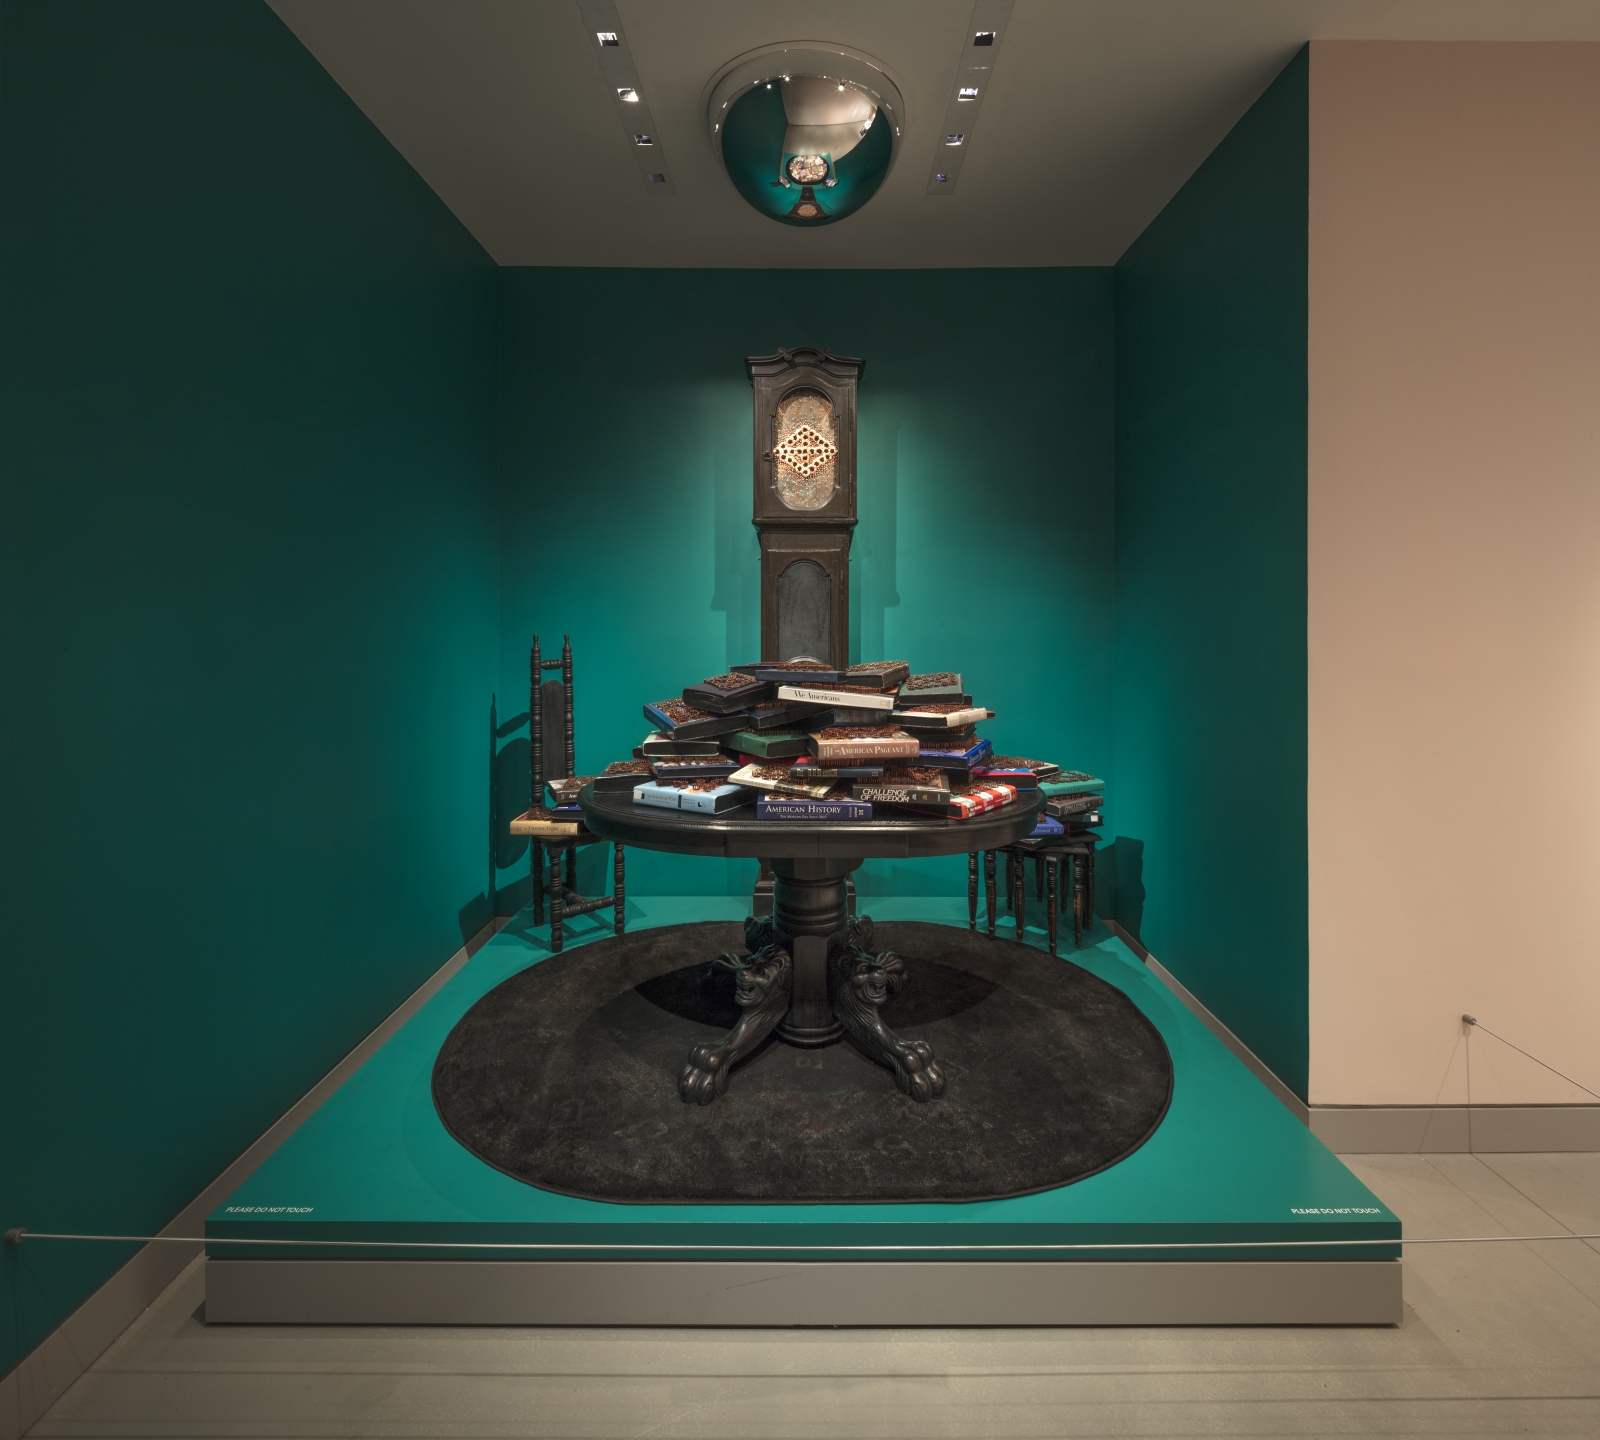 “Clapping with Stones: Art and Acts of Resistance,” presented by the Rubin Museum of Art, installation view 2